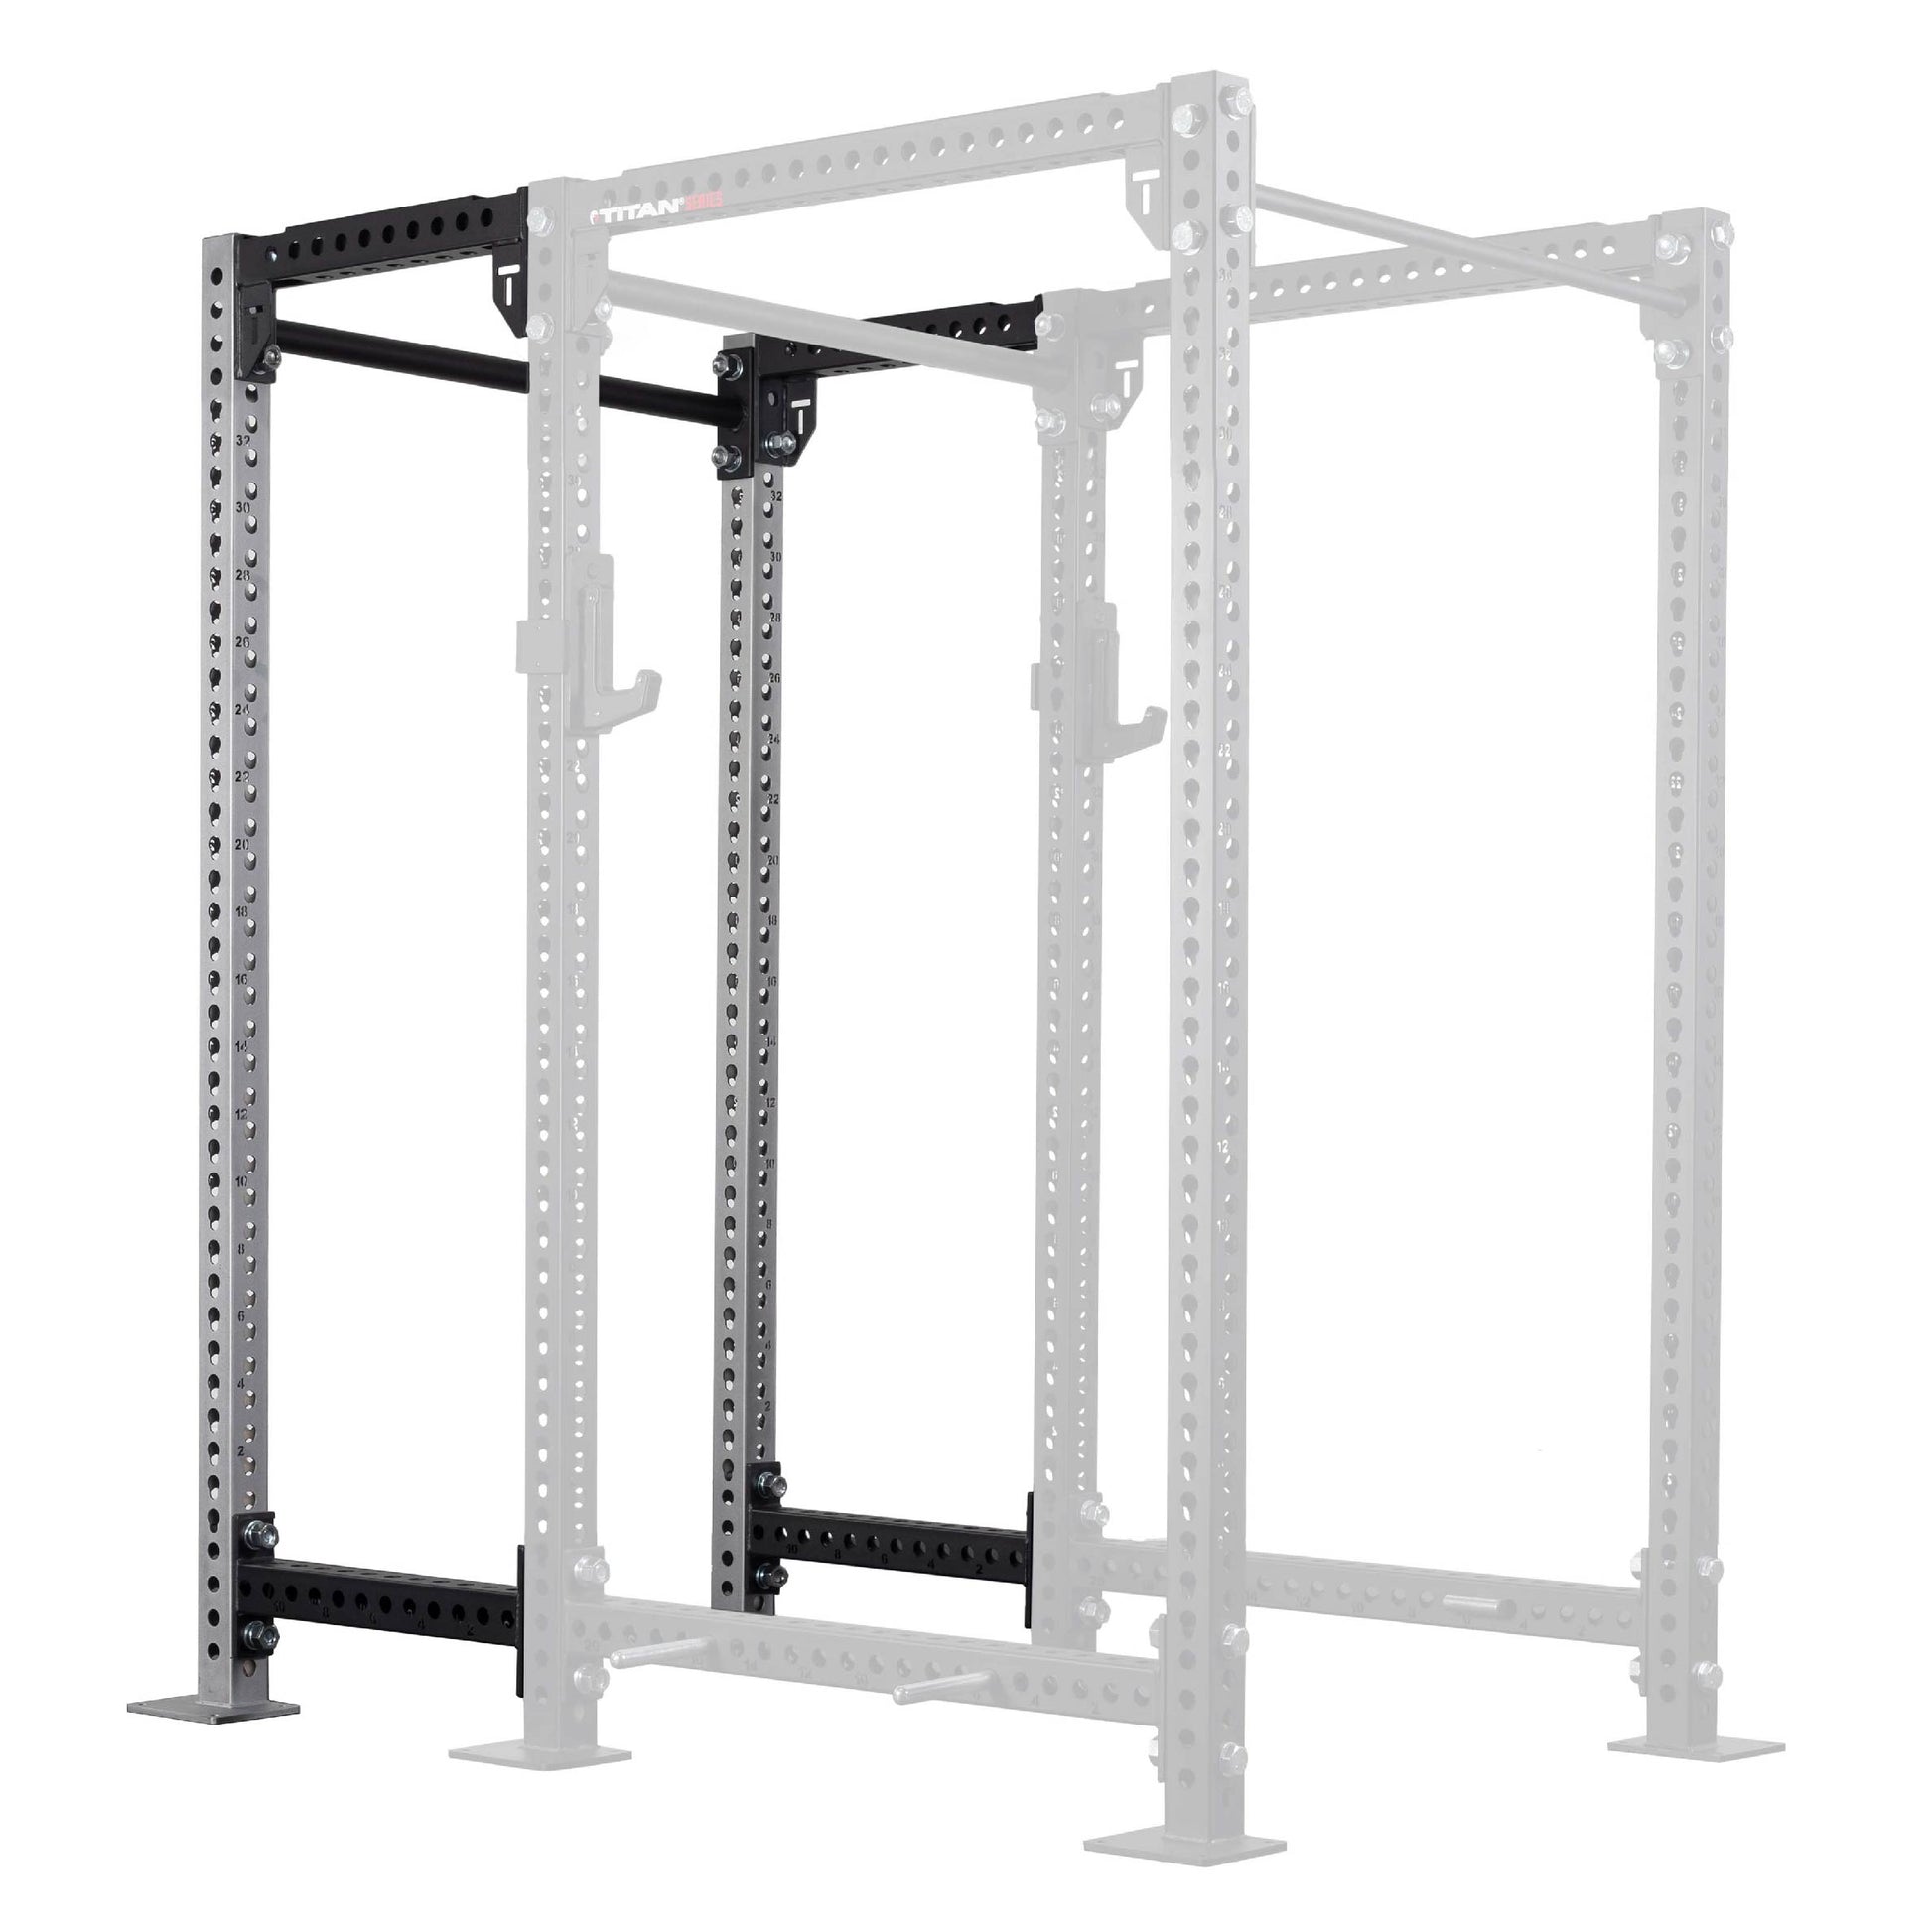 TITAN Series 24" Extension Kit - Extension Color: Silver - Extension Height: 90" - Crossmember: 2" Fat Pull-Up Bar | Silver / 90" / 2" Fat Pull-Up Bar